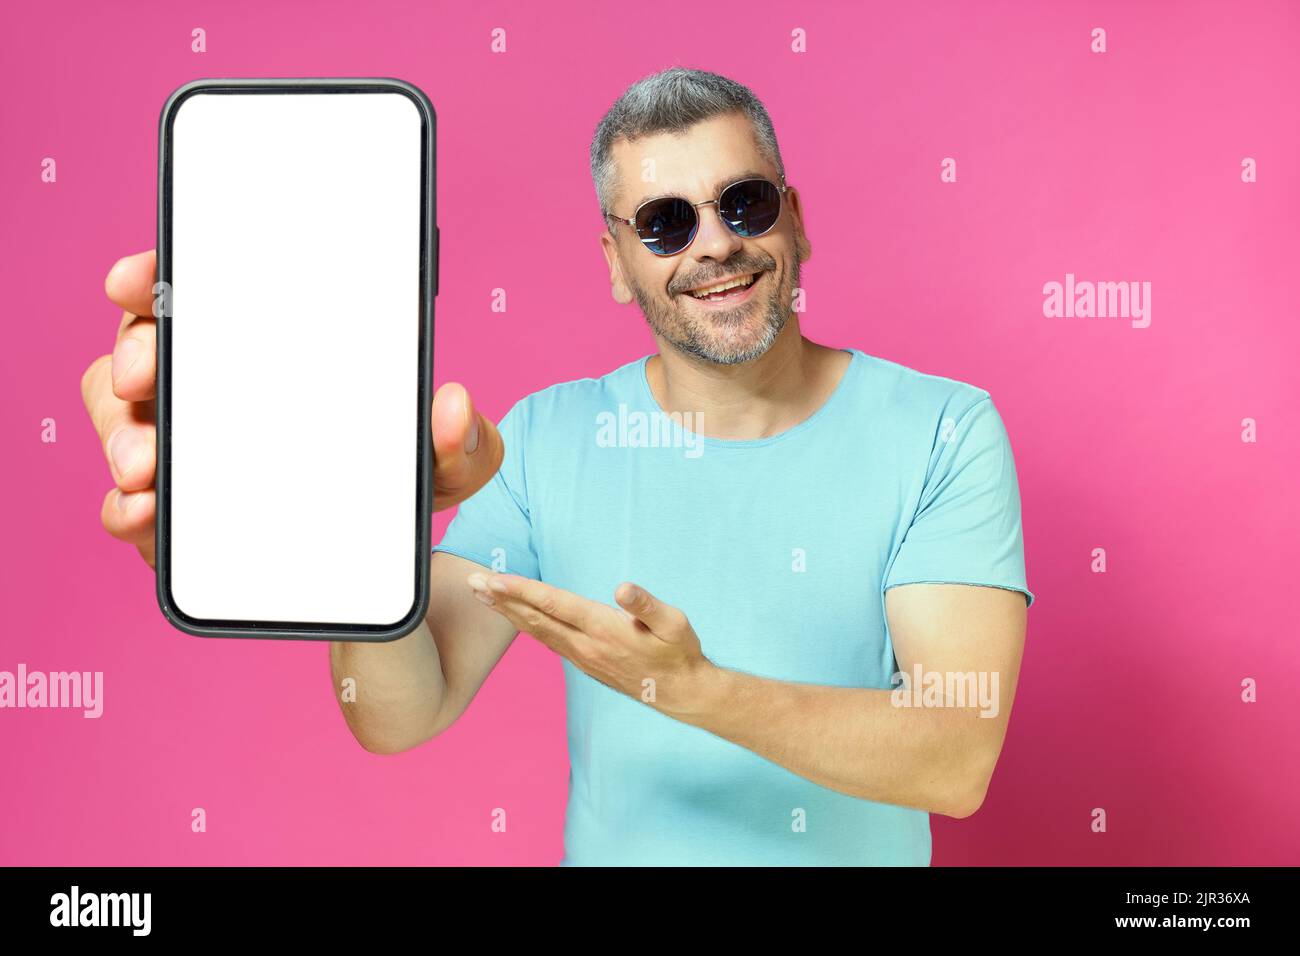 Mobile app advertisement on smartphone screen in hand of handsome man, guy 30s 40s in casual blue shirt and sunglasses isolated on pink background. Man with phone studio shot.  Stock Photo